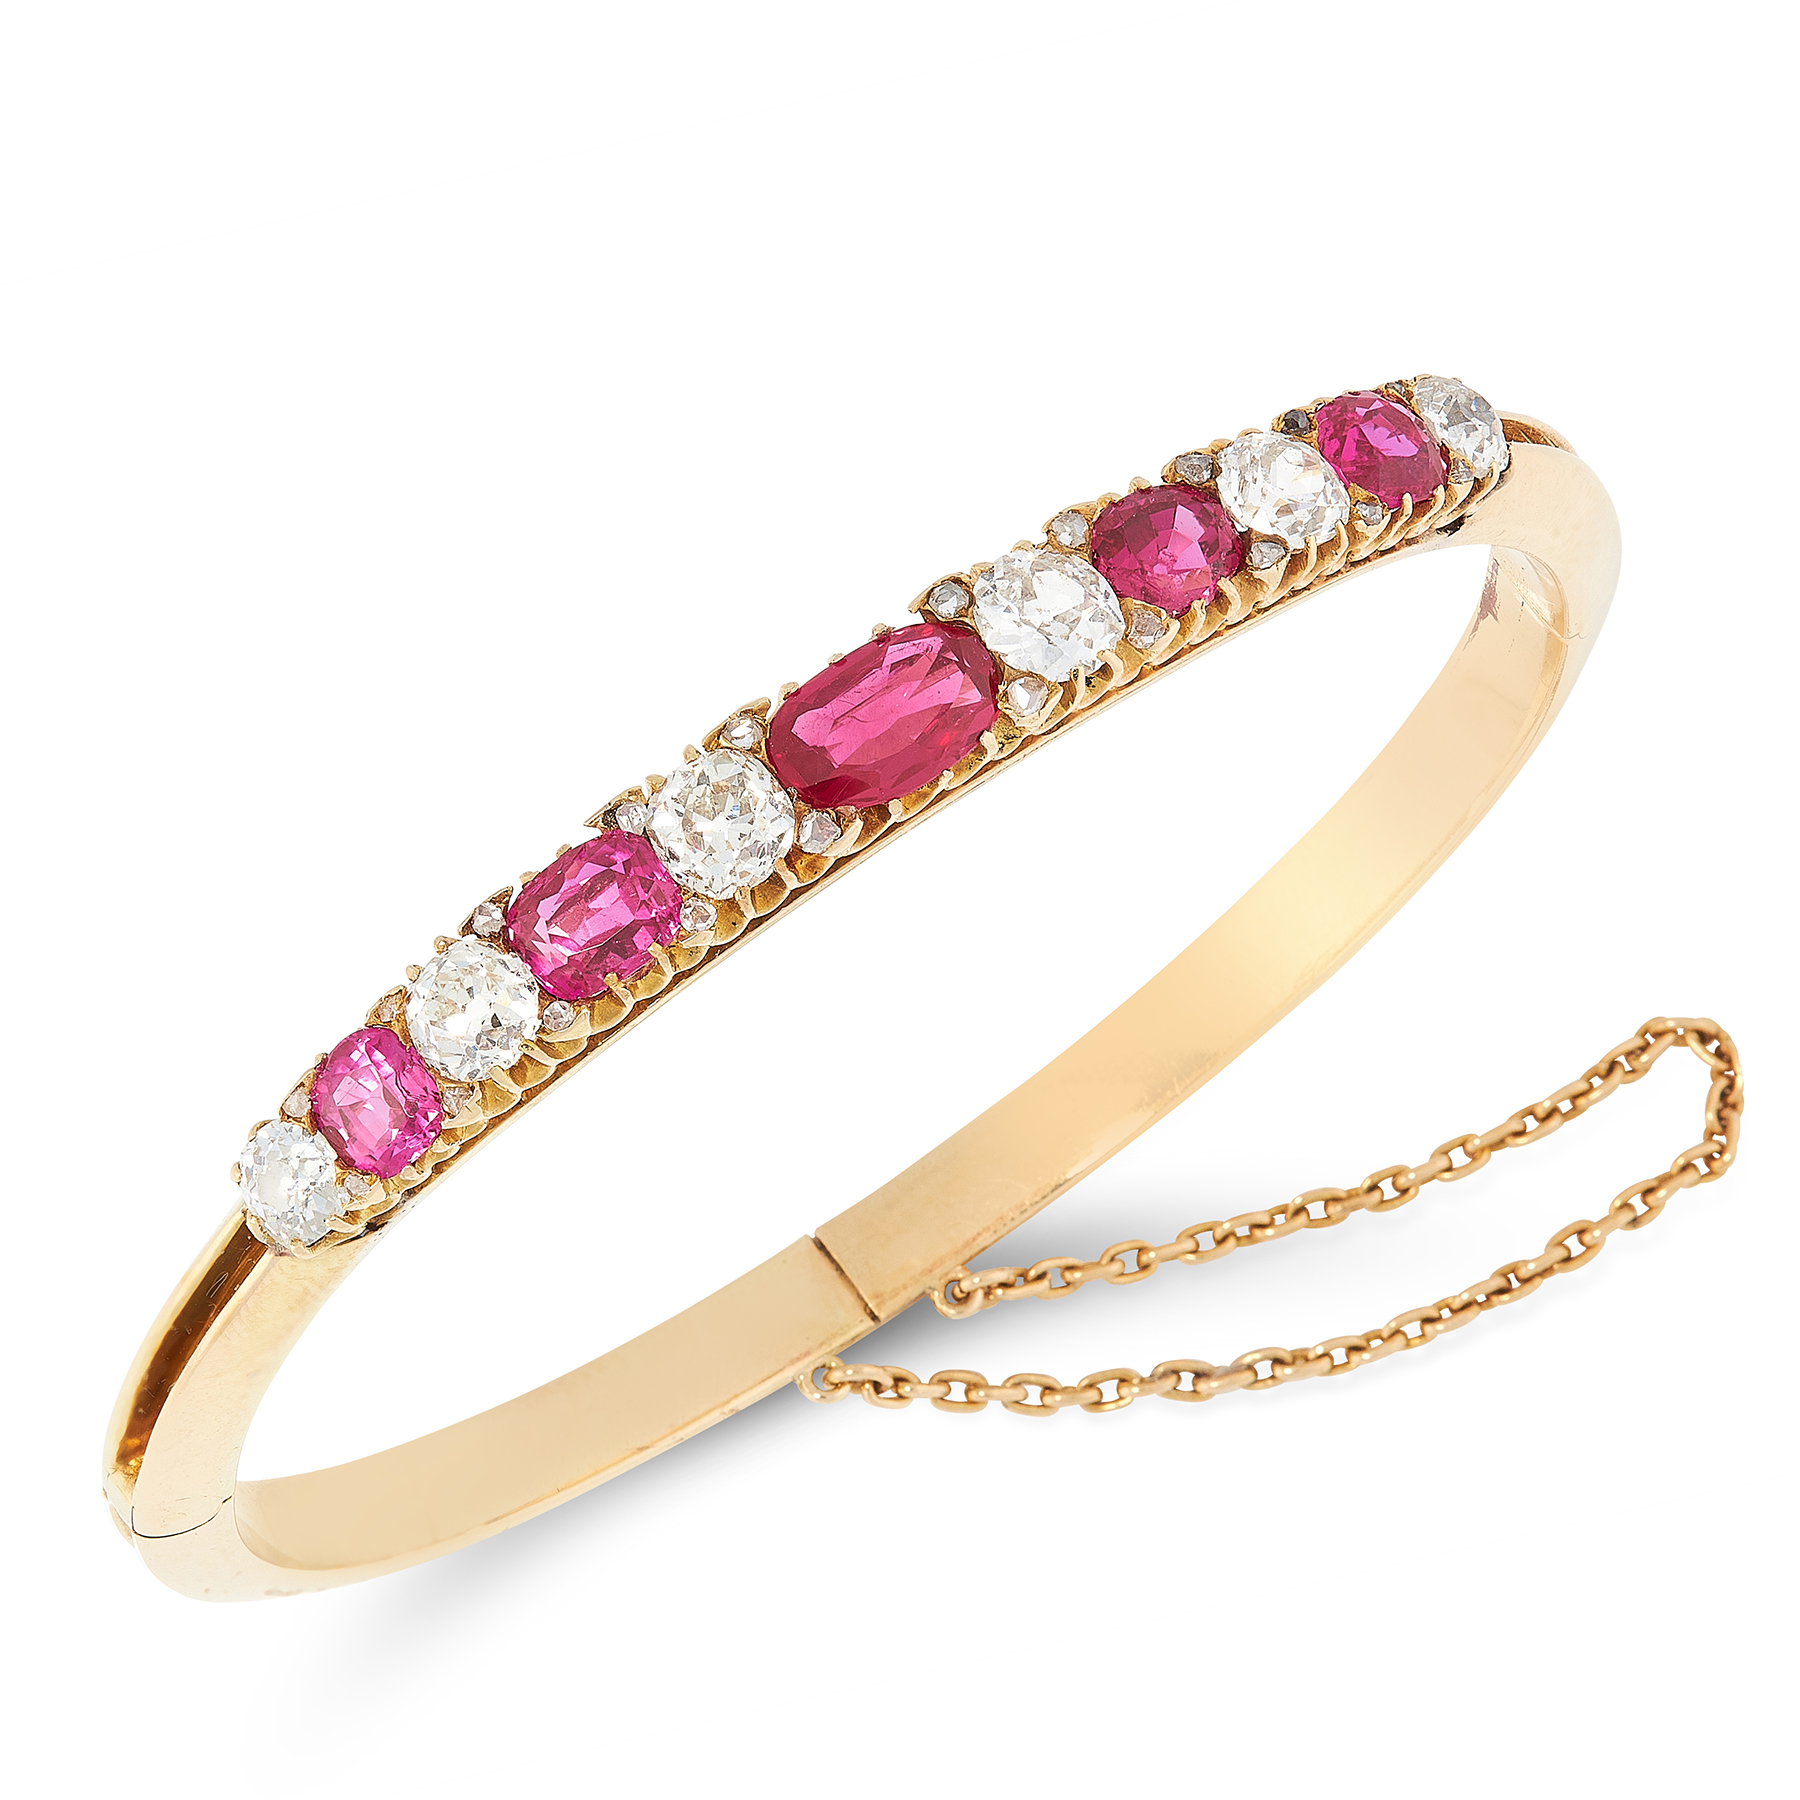 AN ANTIQUE BURMA NO HEAT RUBY AND DIAMOND BANGLE in 18ct yellow gold, set with five graduated oval